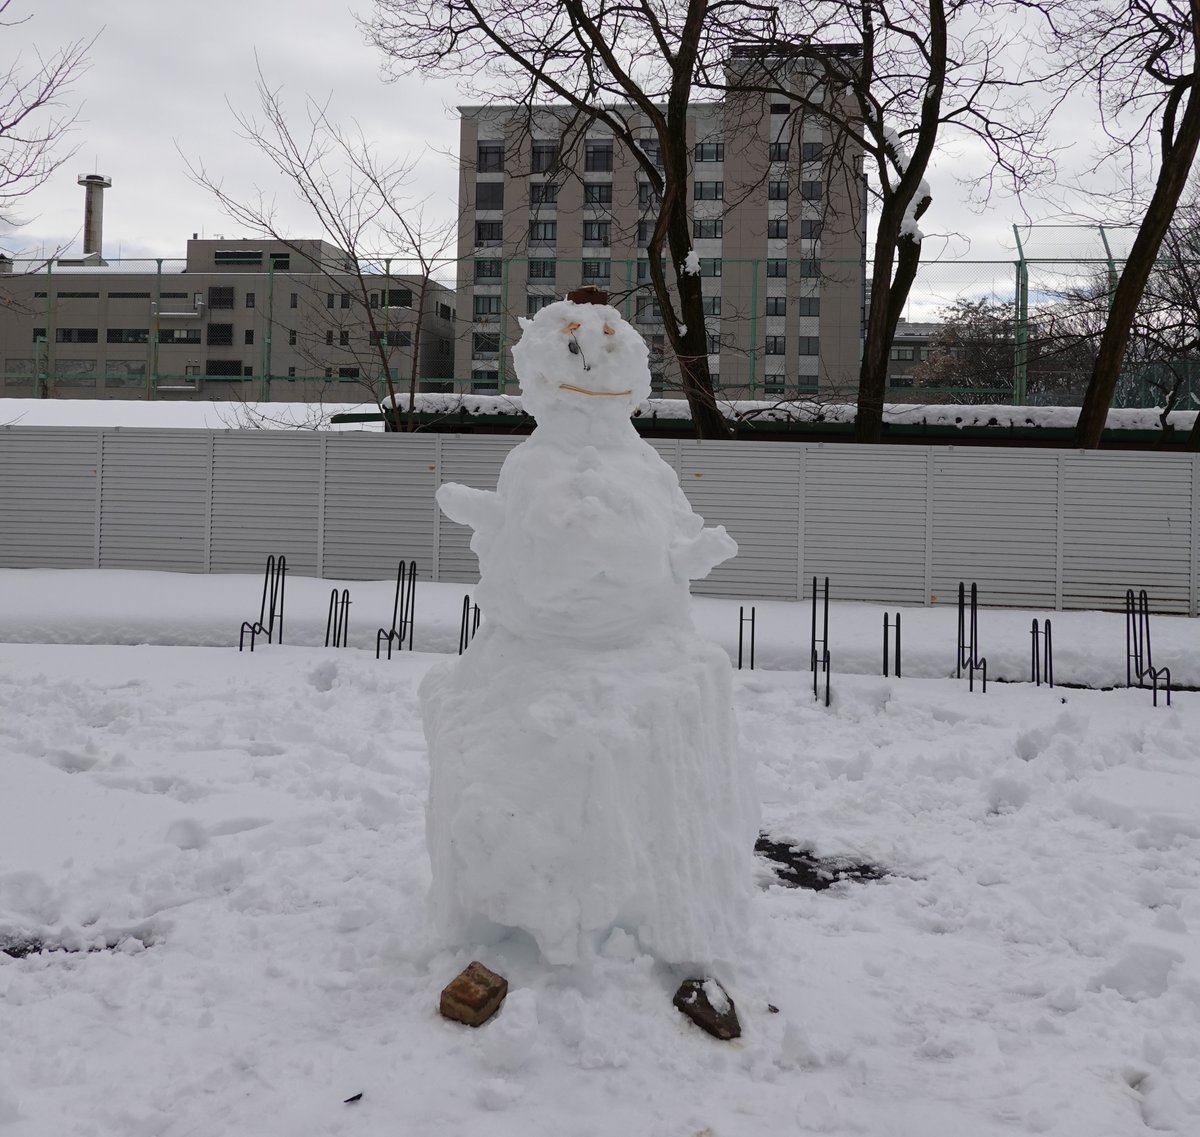 Good #snow on #campus! #Students @ShinshuUni enjoyed making #Snowmen. See which one made by #Japanese students, and the other by #western students? #studyinjapan #Winter2024 #matsumotocity #culture